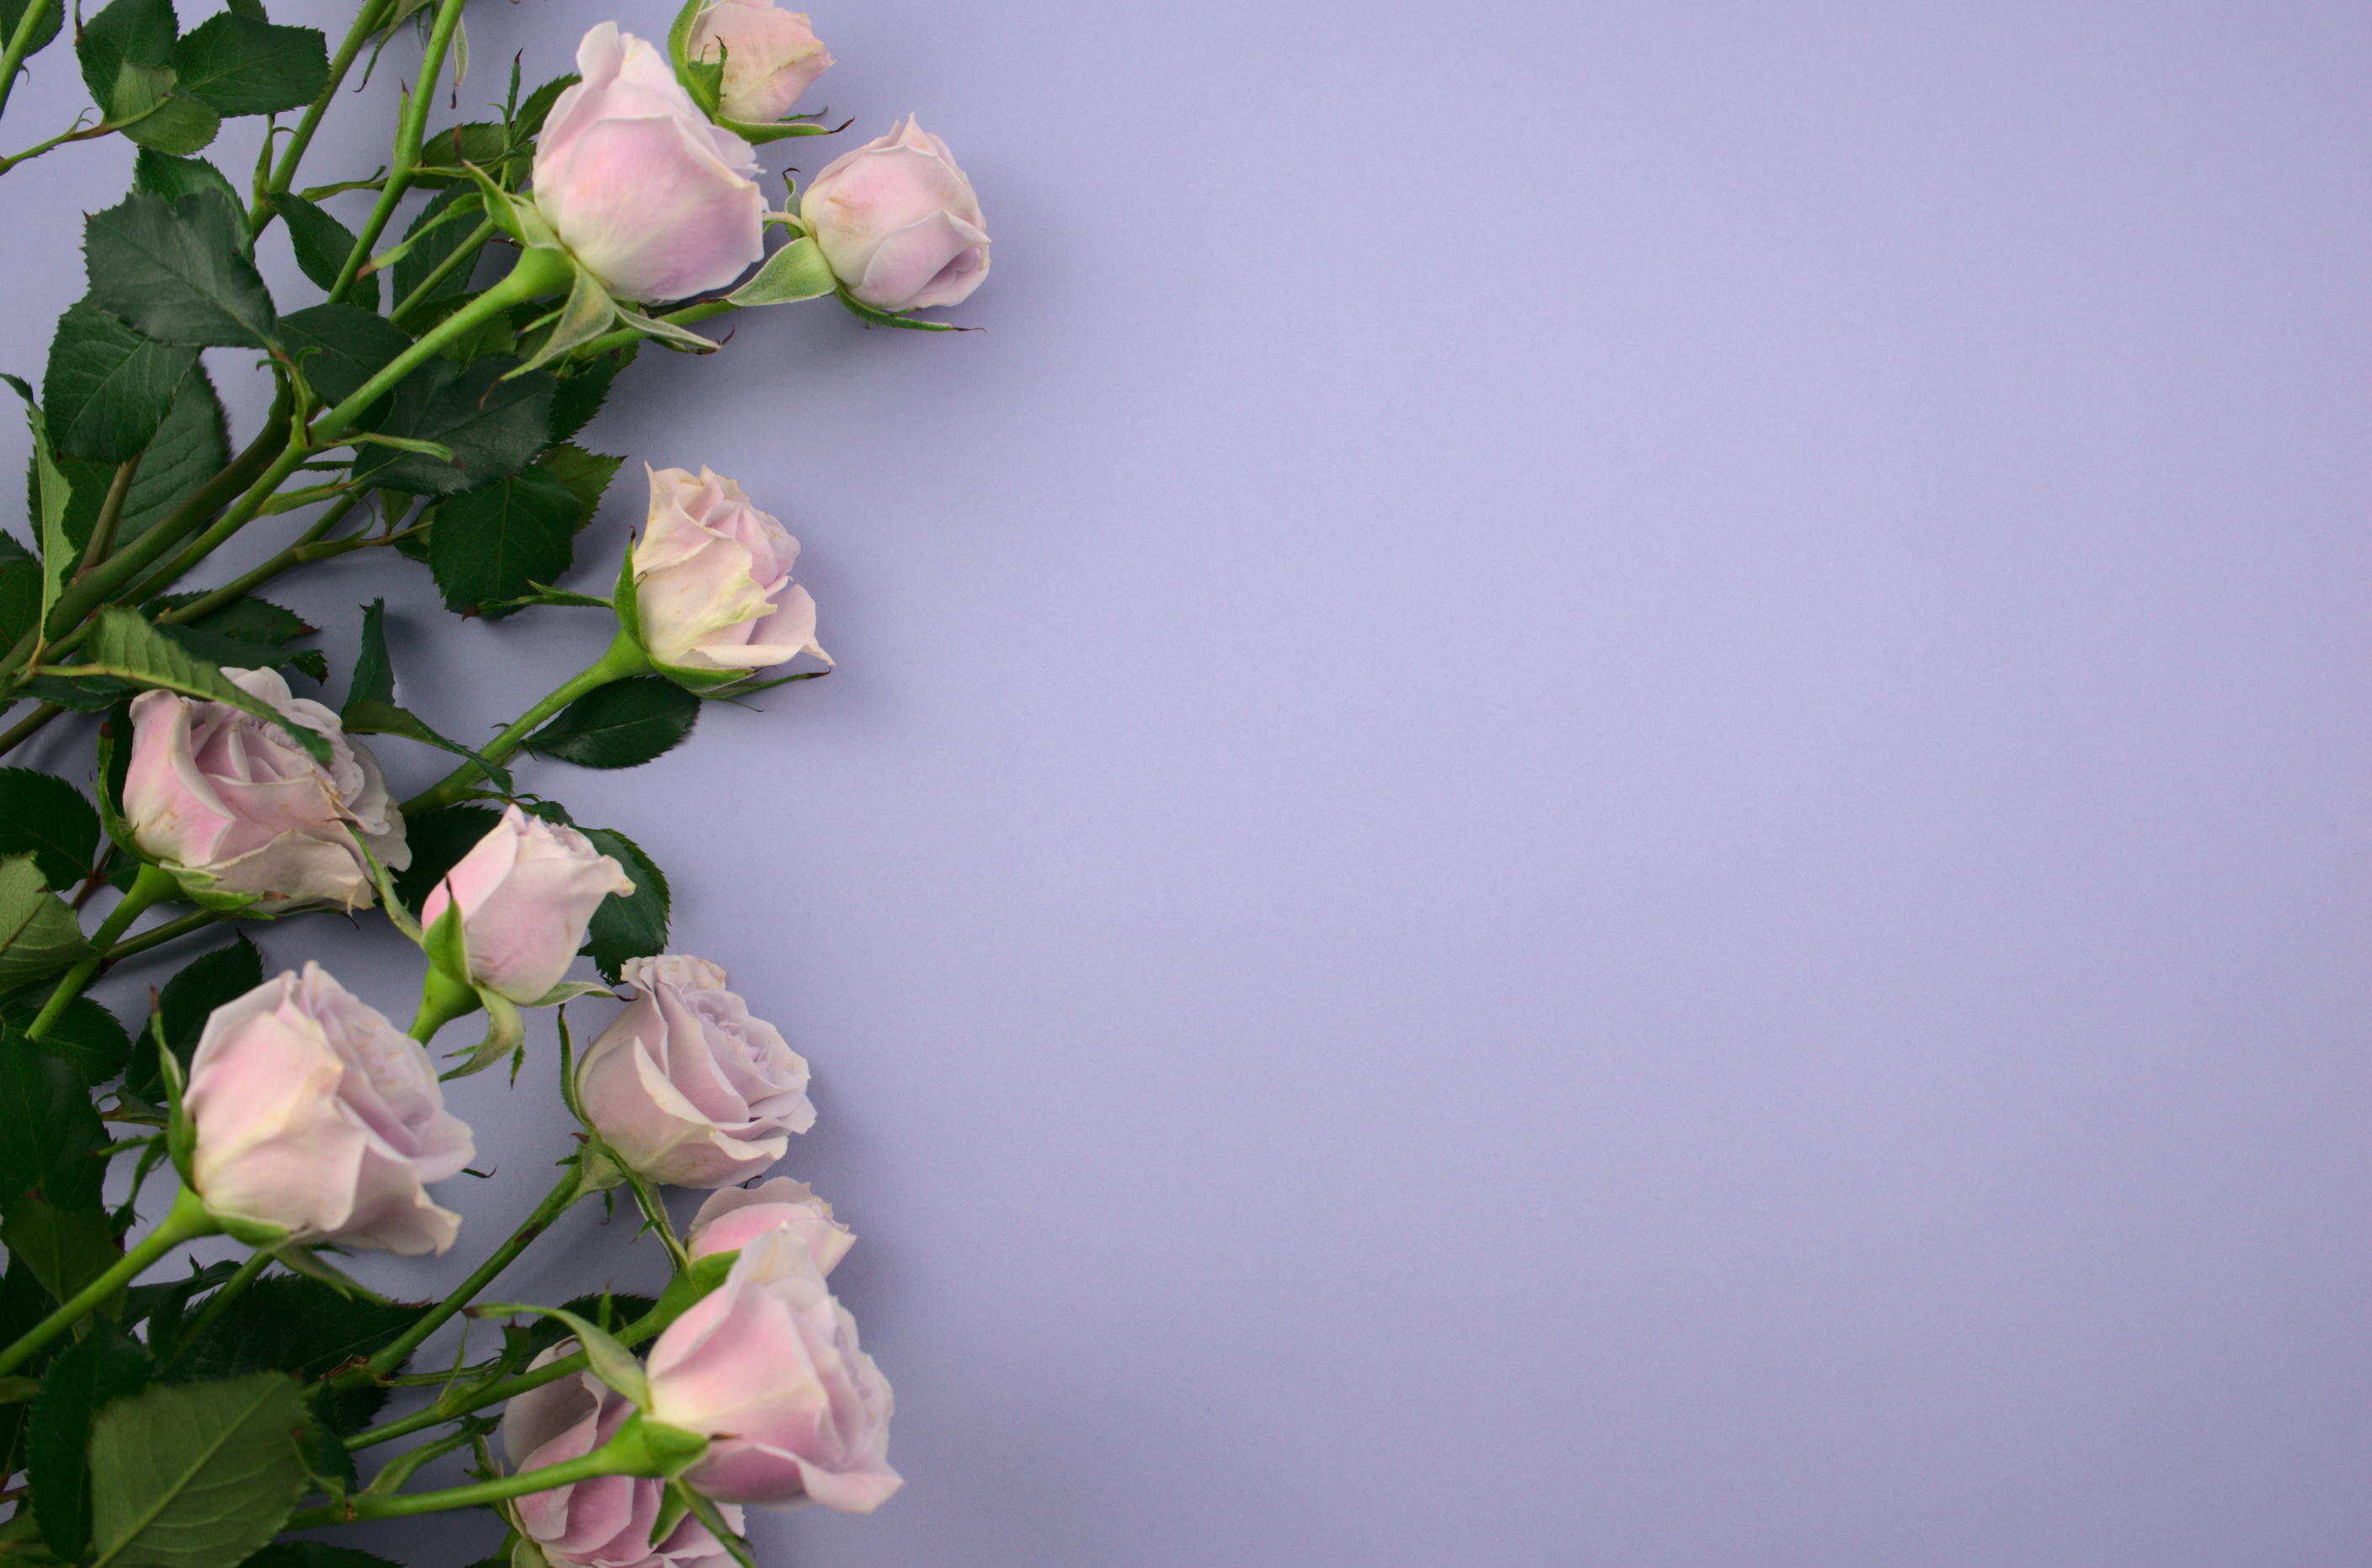 Purple, Pink Roses Flat Lay on Smooth Light Blue Background